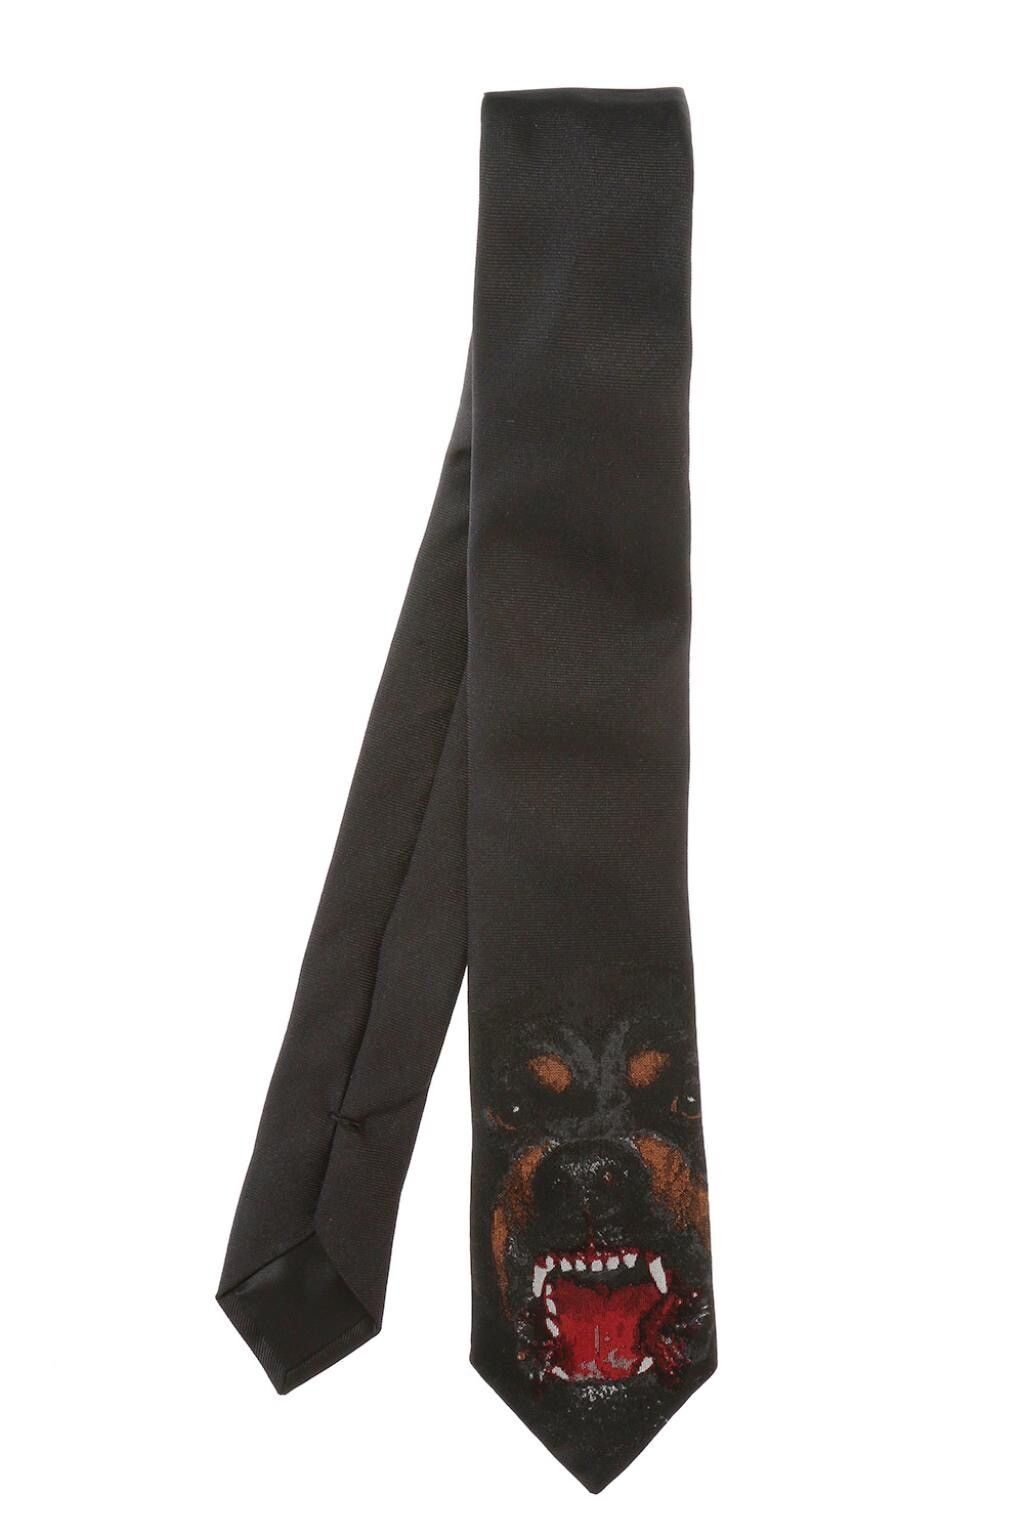 Givenchy RAREST ARCHIVE GIVENCHY ROTTWEILER DOG TIE BY RICARDO TISCI Size ONE SIZE - 2 Preview